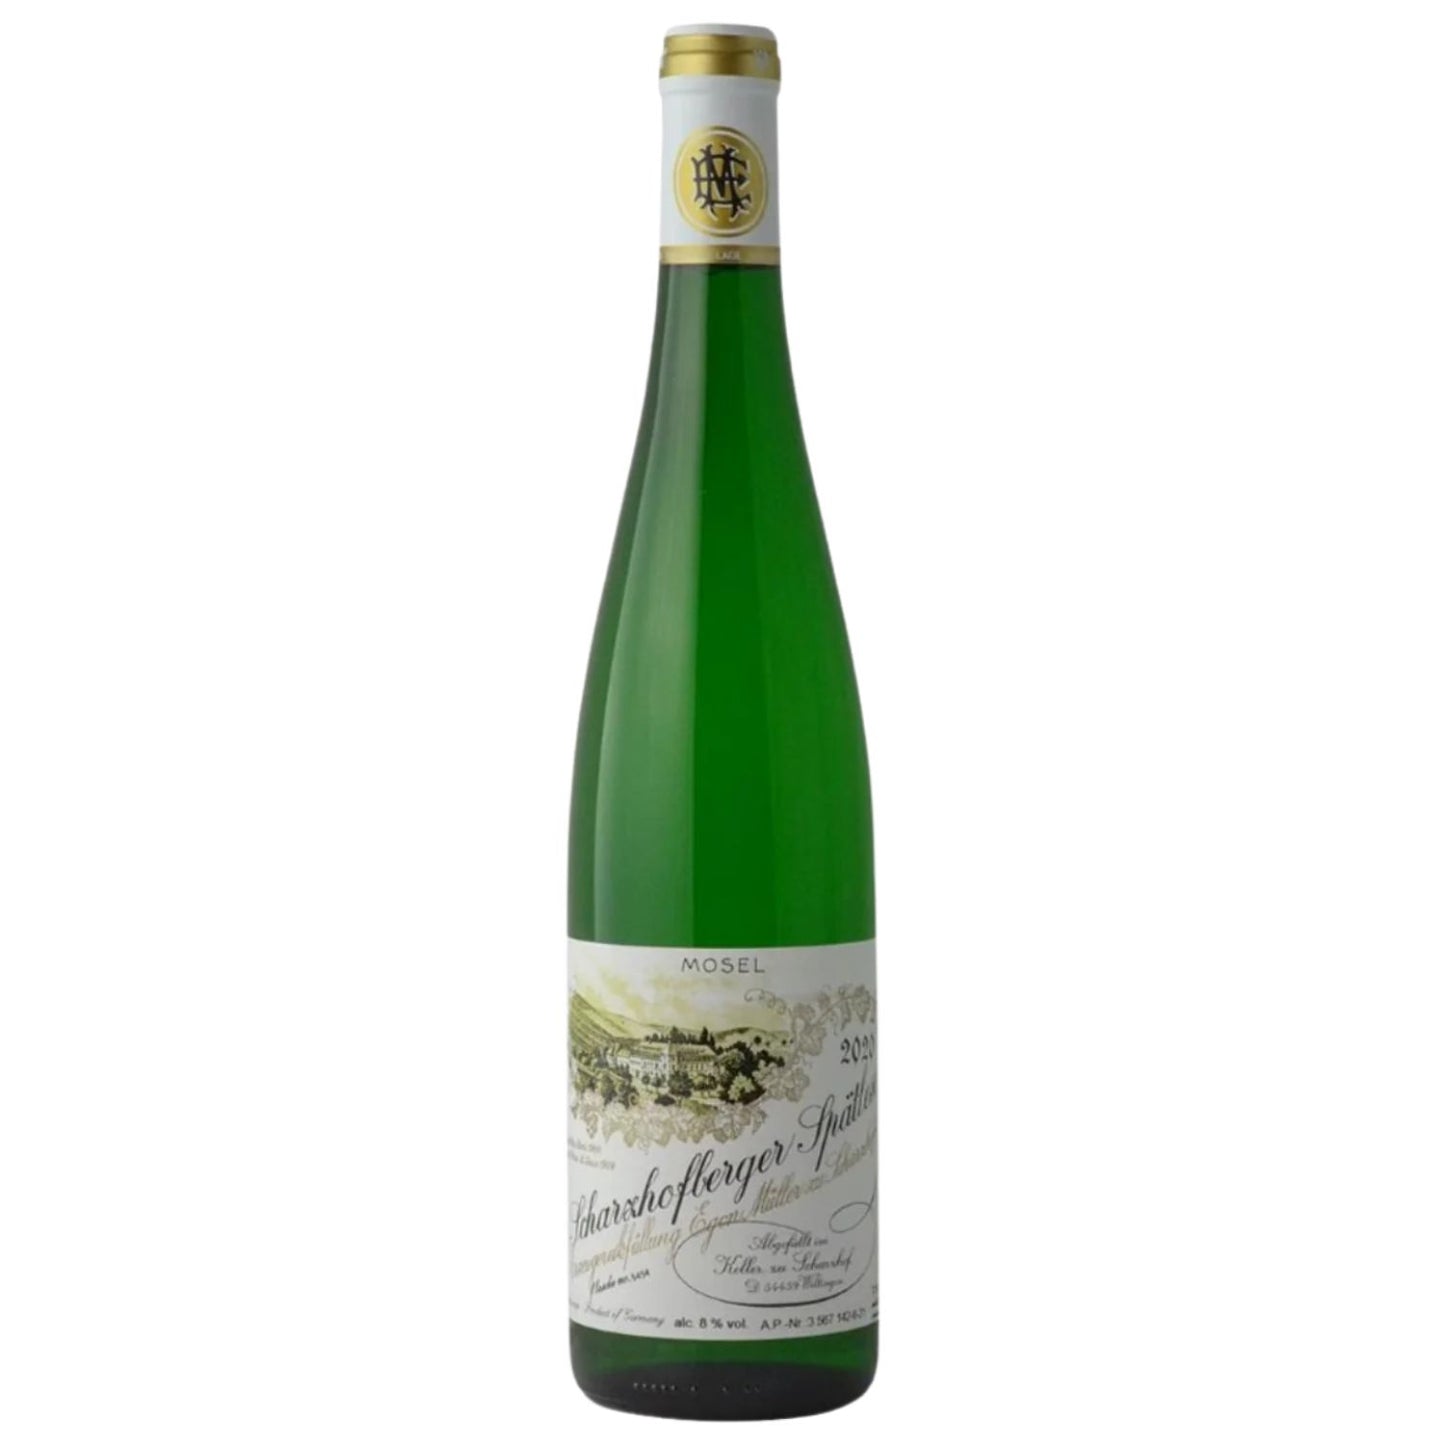 Egon Muller: Mosel Scharzhofberger Riesling Spatlese 2020